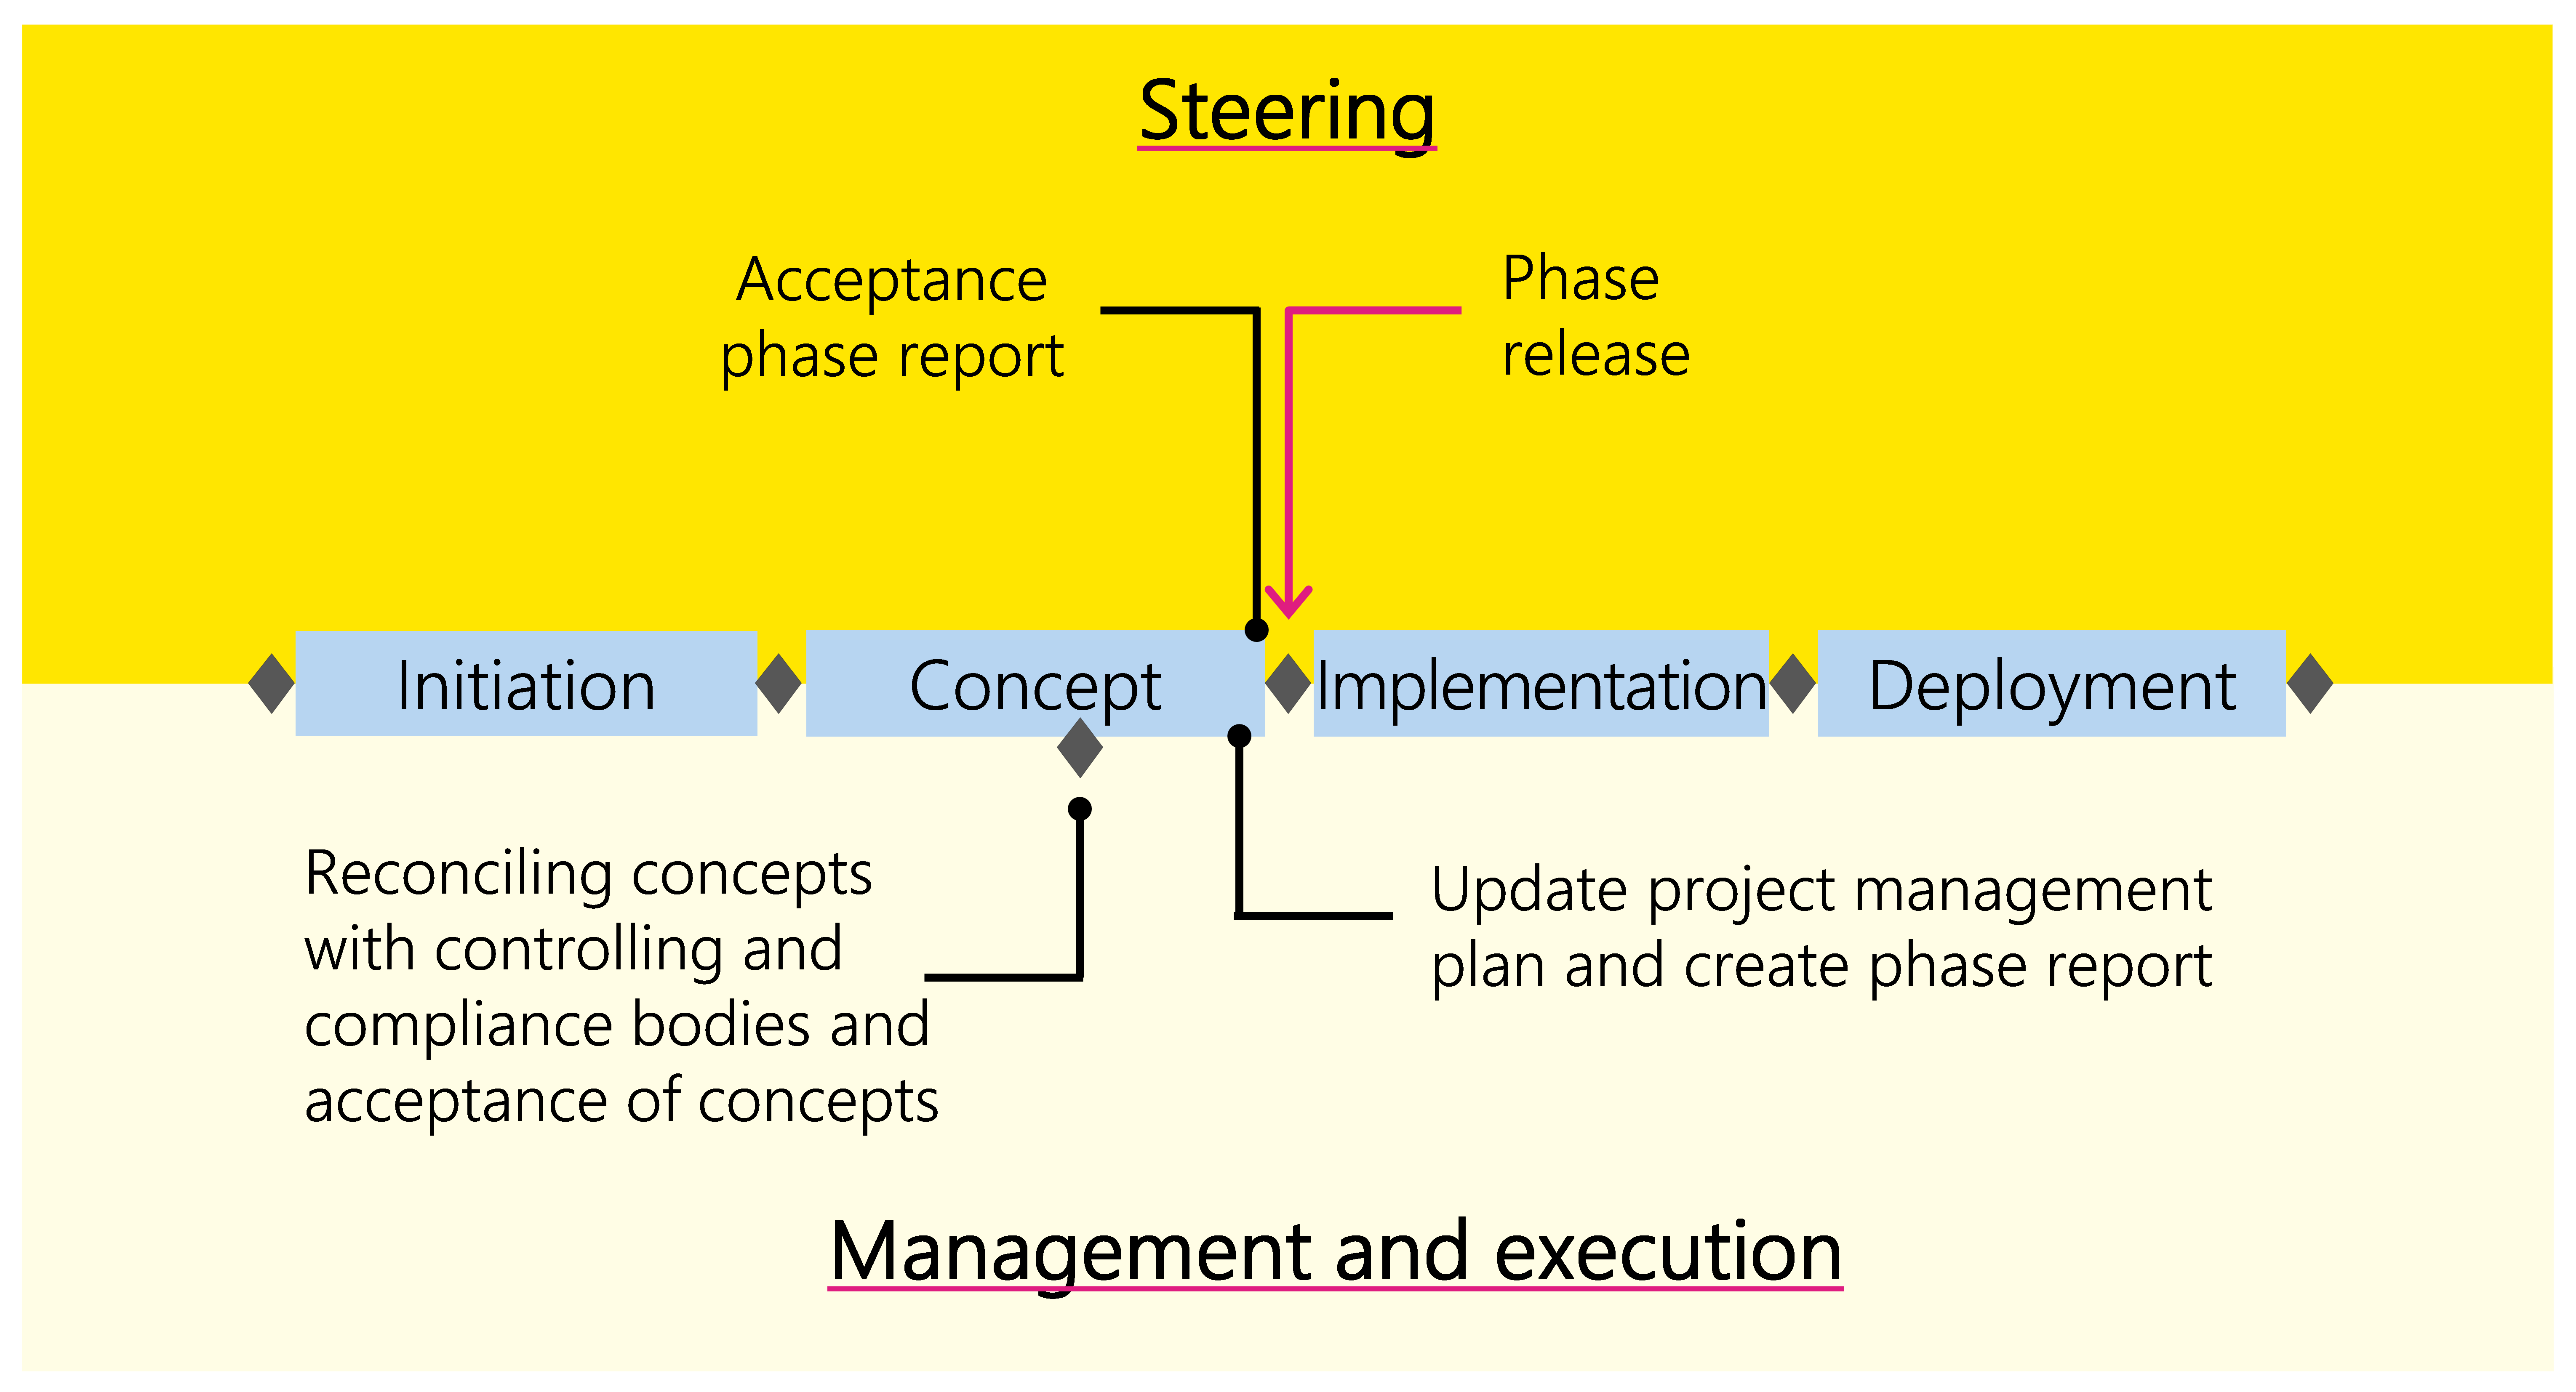 Figure 19: Example of a typical decision-making process